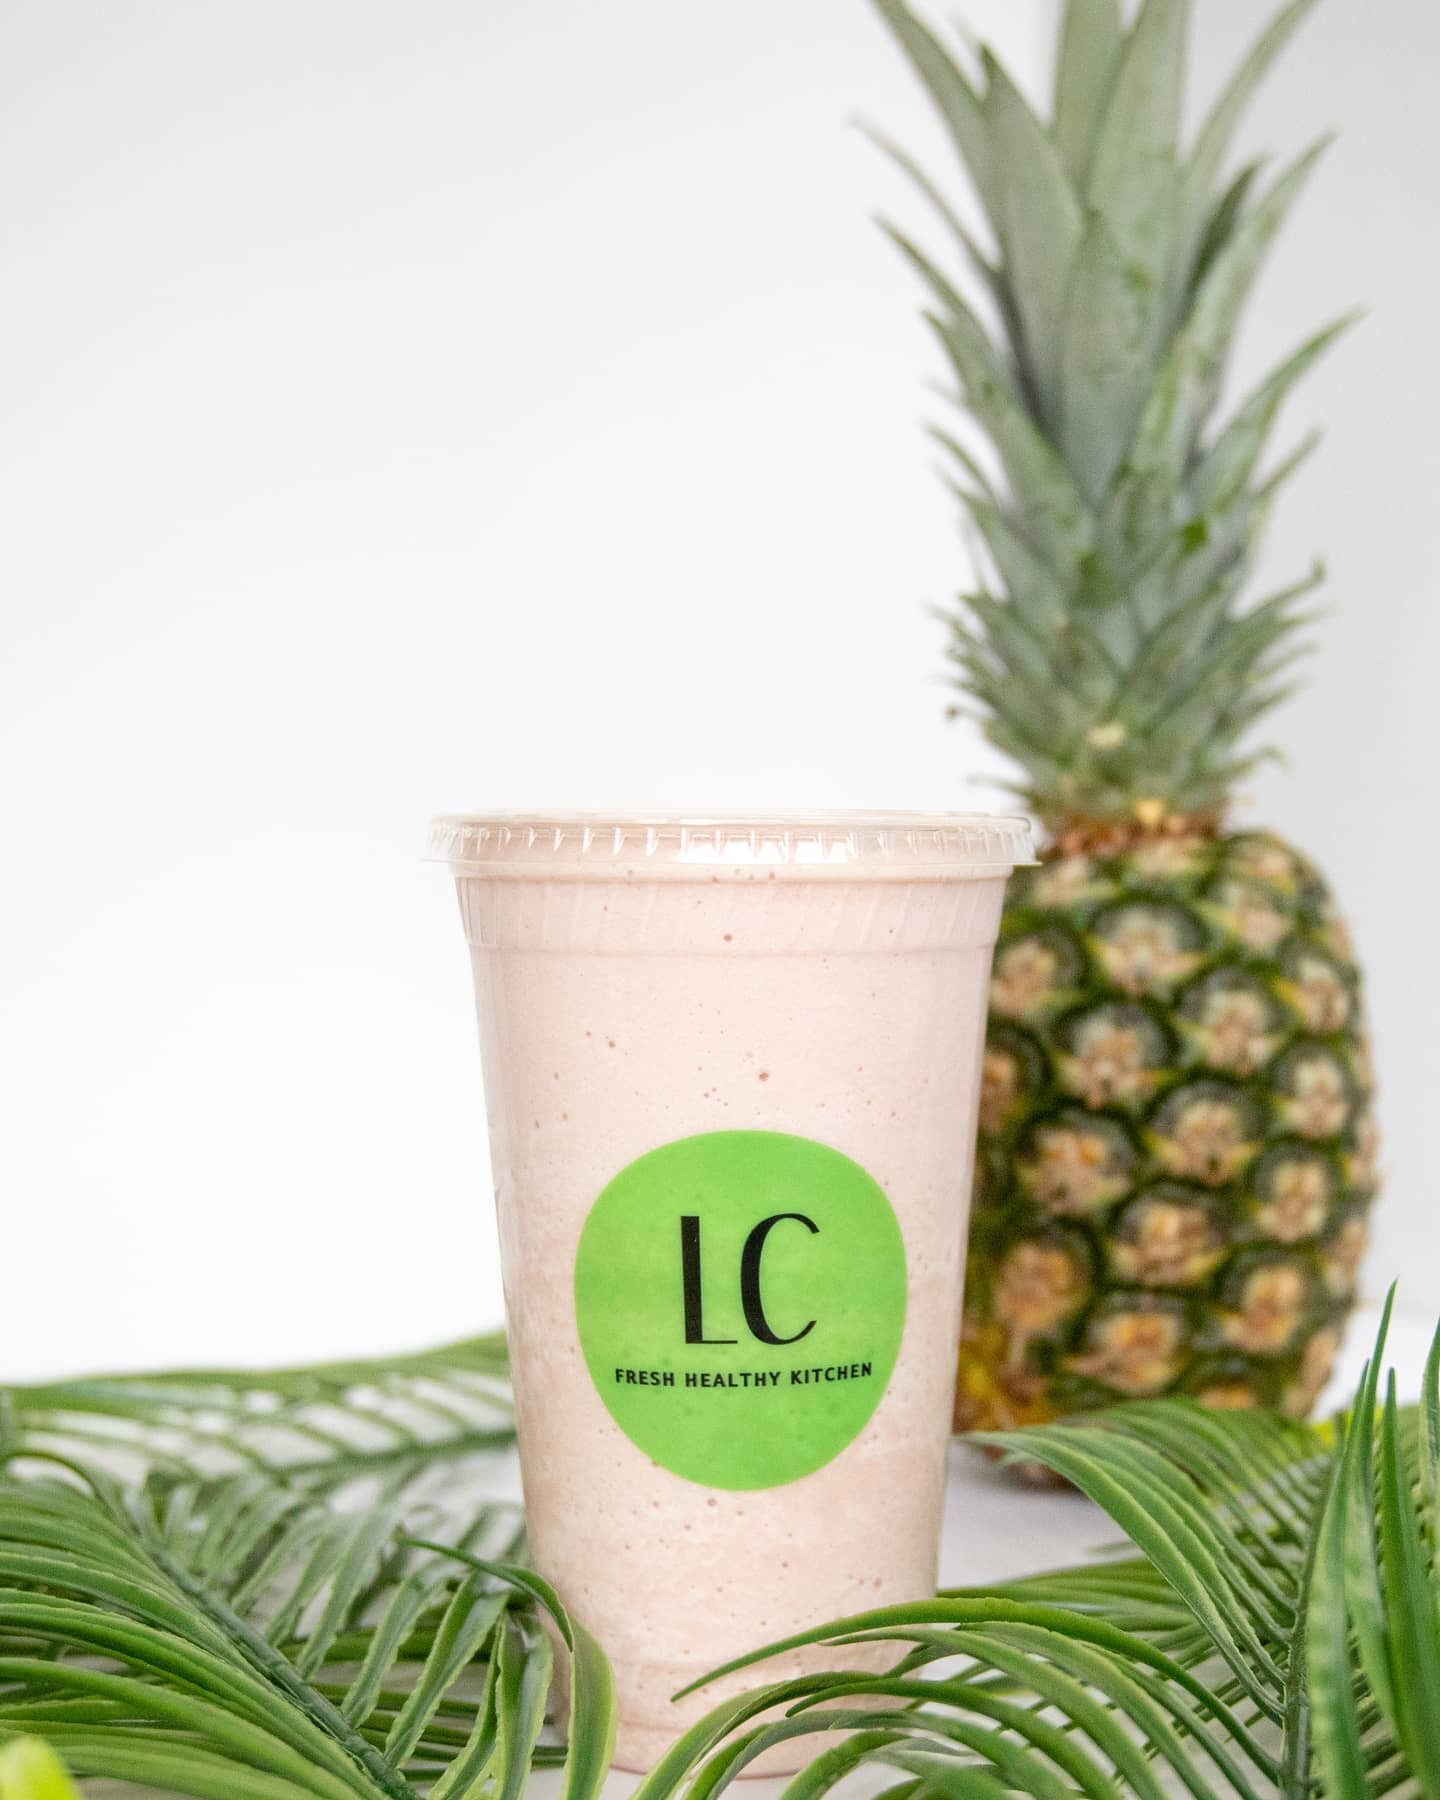 Add some plant power to your smoothie! Try our vegan protein powders for a delicious &amp; nutritious boost. 💪

-
📷 @julianawhitephotography
-
#jointhelyfestyle #liveyourbestlyfe #lyfeacai #lyfer